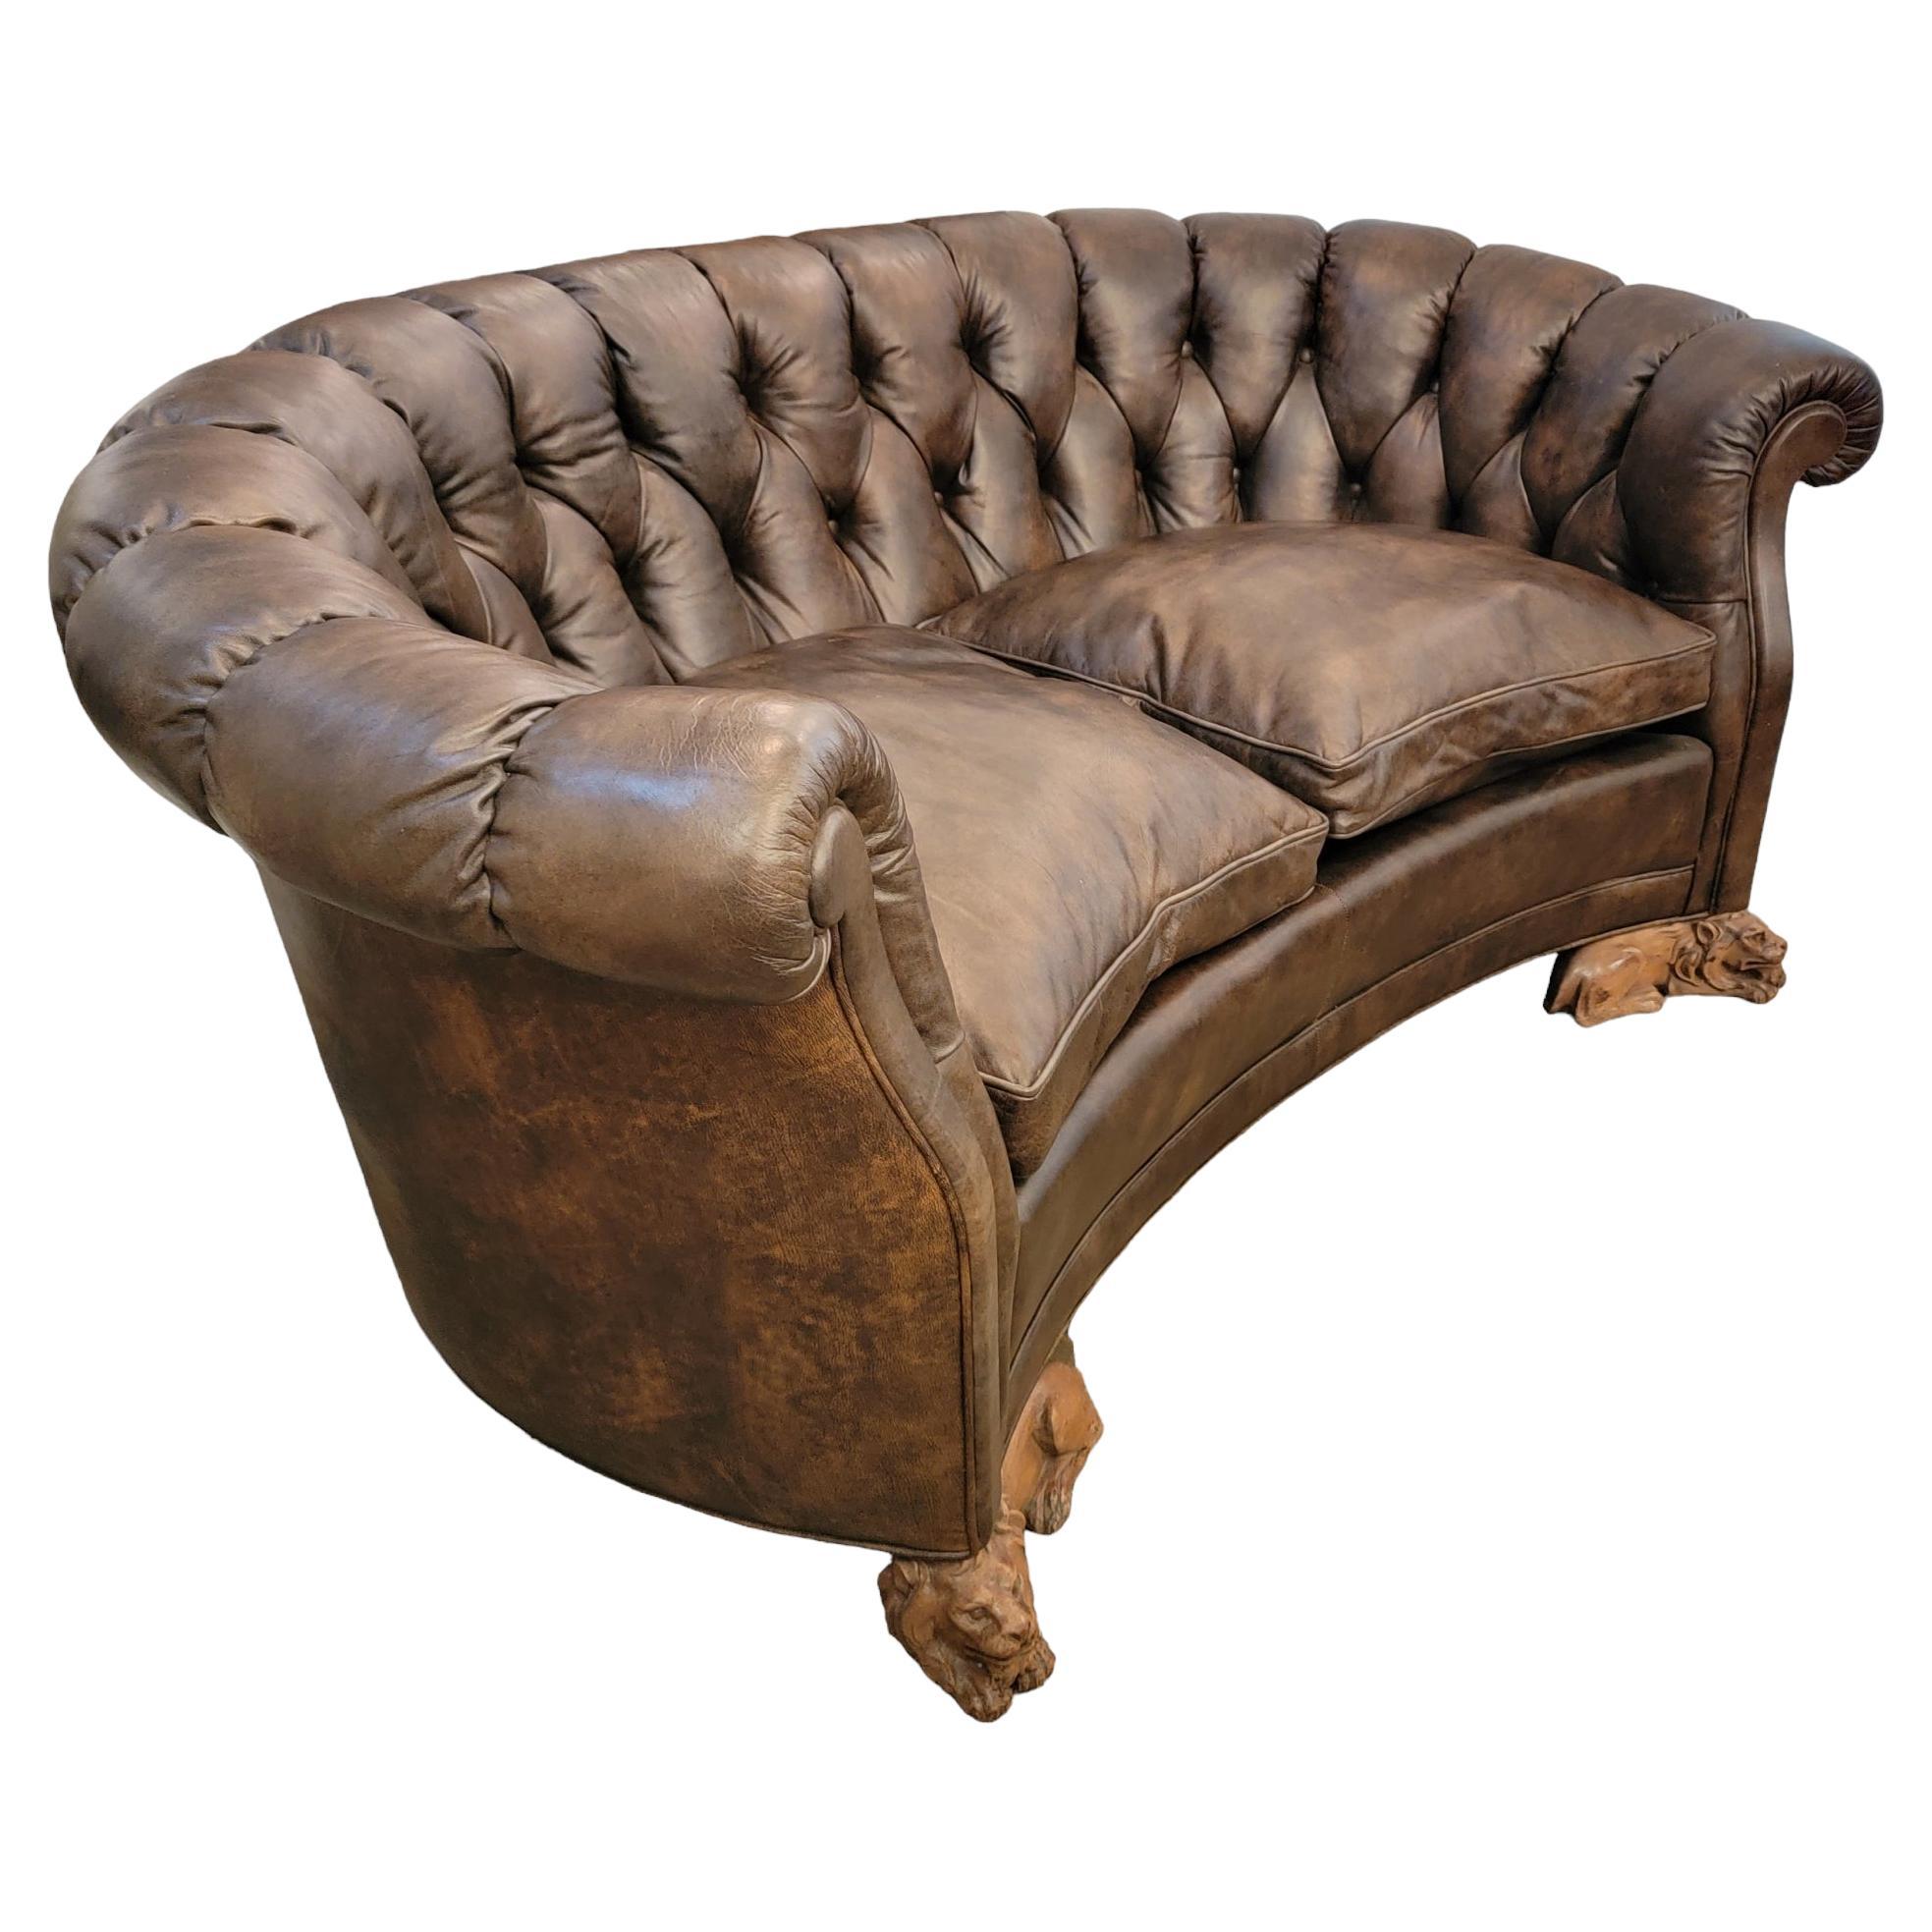 Antique English Chester field Sofa with Hand Carved Wood Lion Legs For Sale